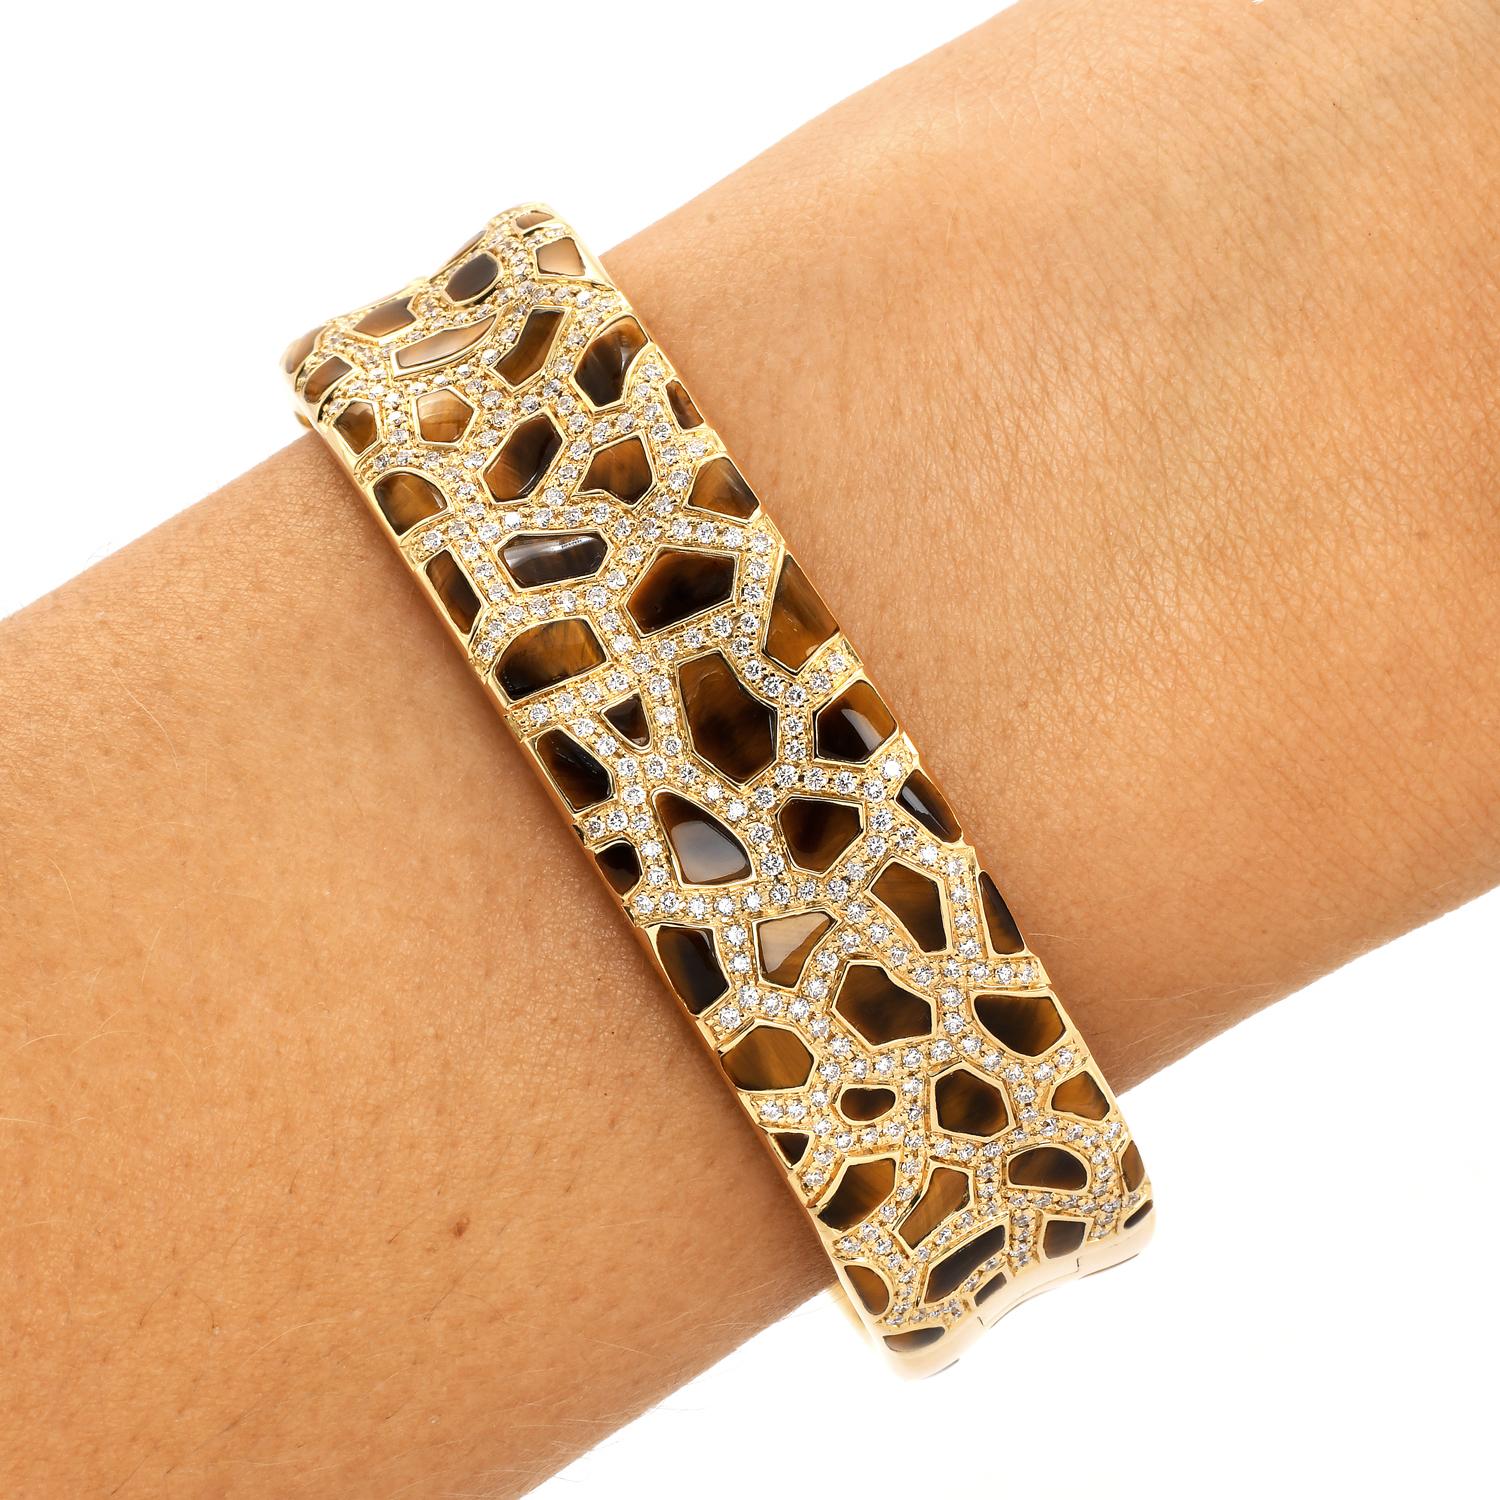 Roberto Coin Diamond Animallier Giraffe Bracelet.

This collectible beautiful bracelet contrasts gold, diamond, and Tiger's eye gemstone.

An eternity style slim medium bracelet, crafted in solid 18K Yellow Gold with an Inlay of Tiger's eyes stones